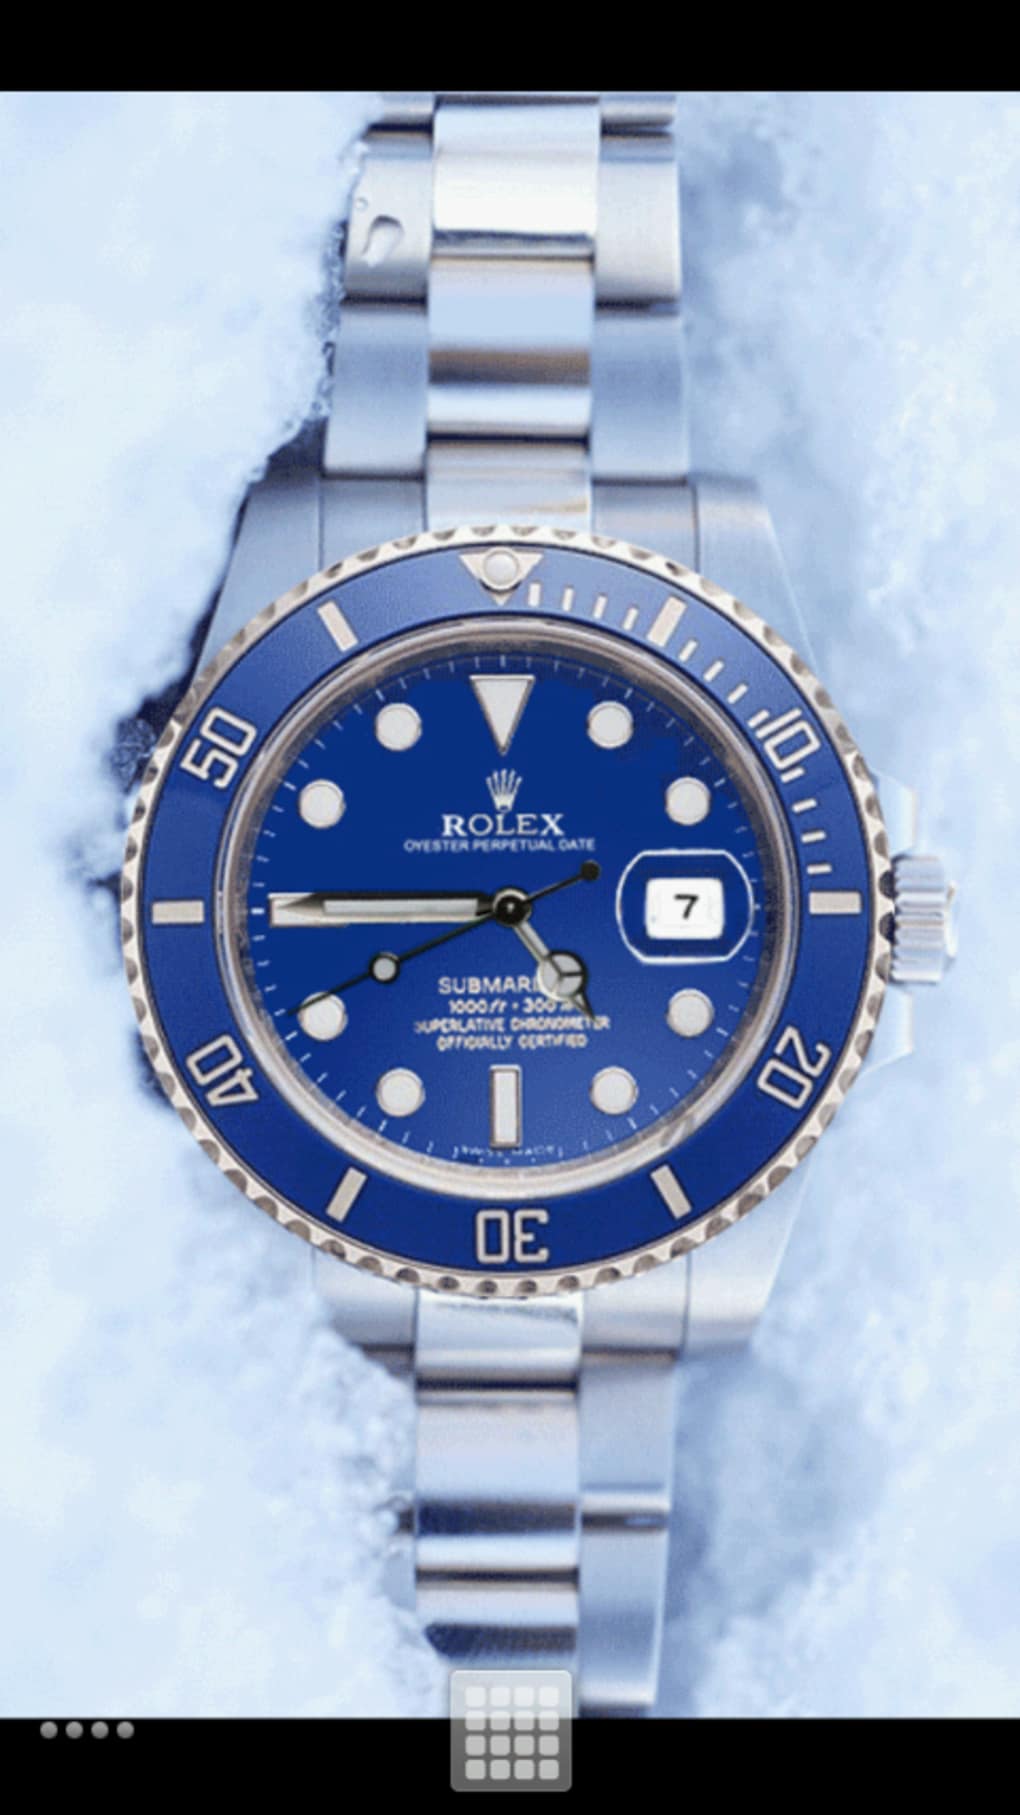 Rolex Watch Live Wallpaper For Android ダウンロード